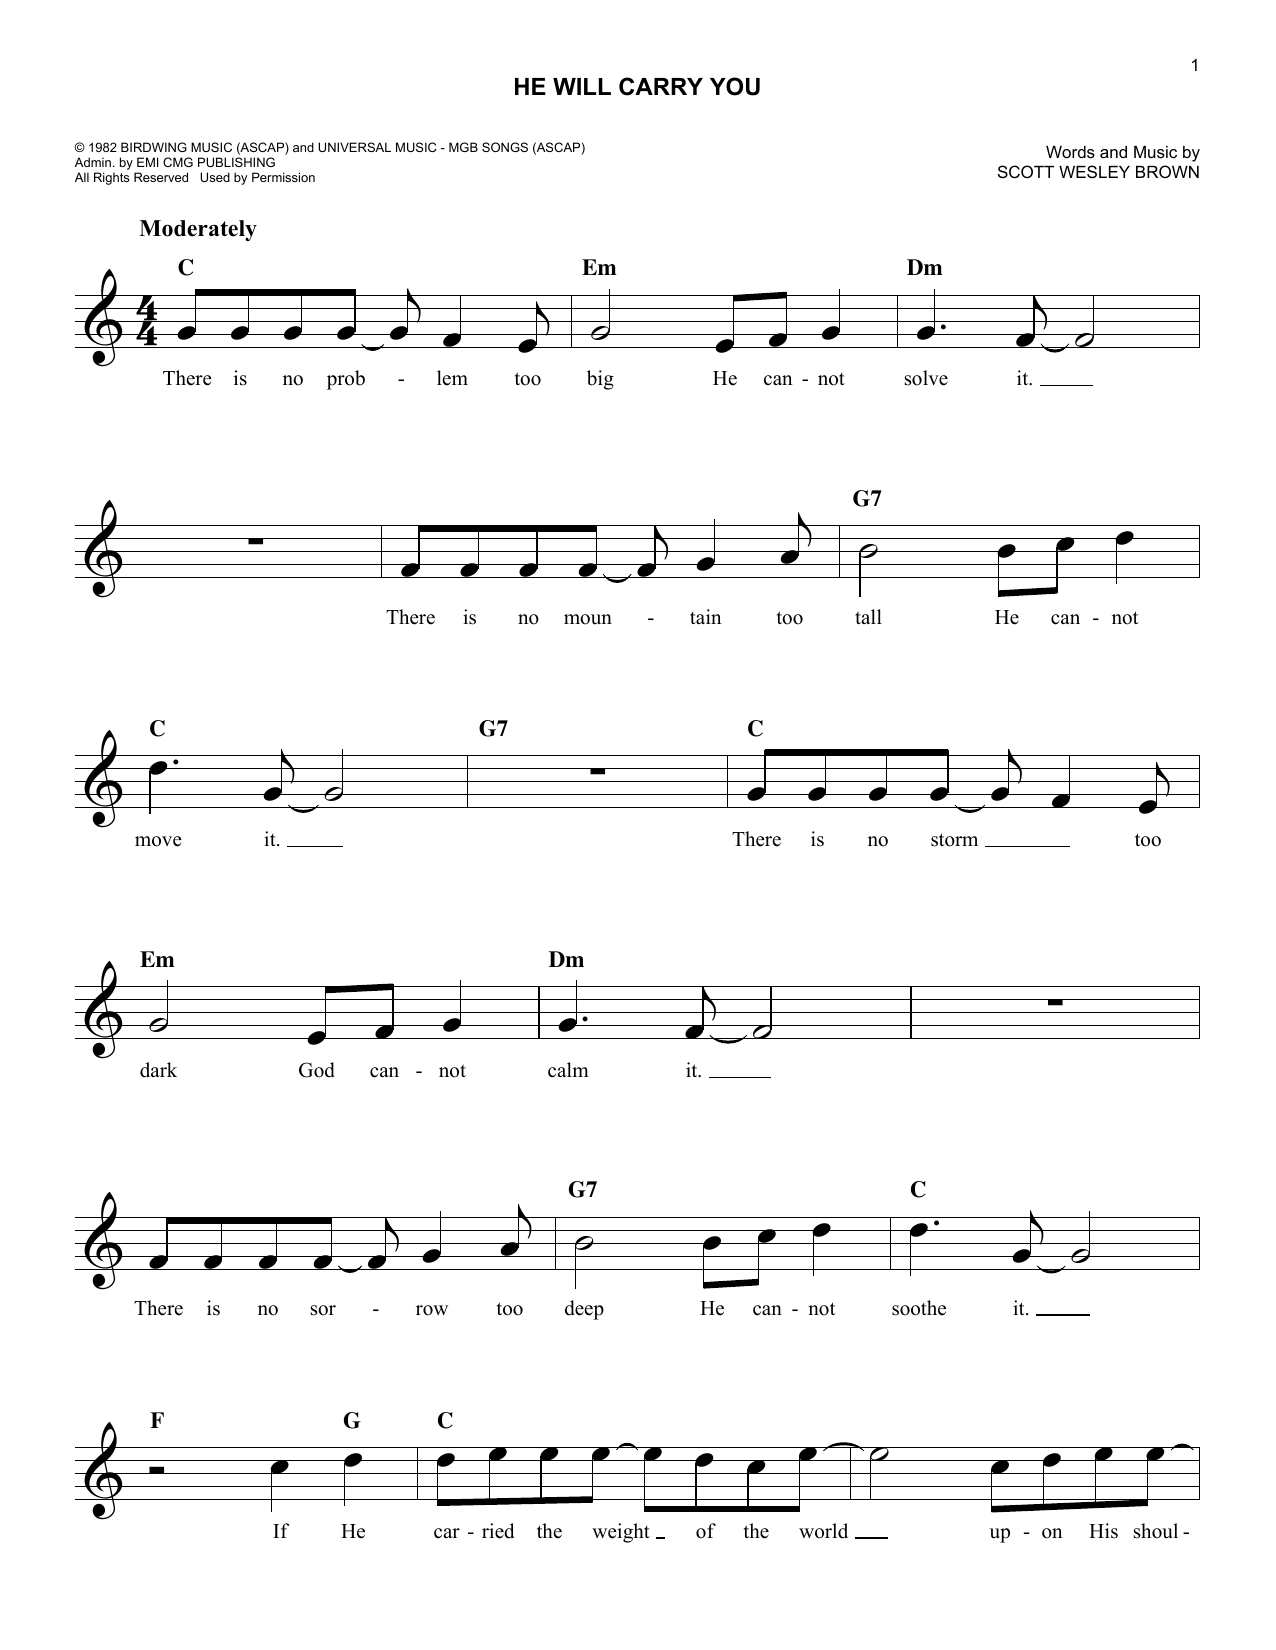 Download Scott Wesley Brown He Will Carry You Sheet Music